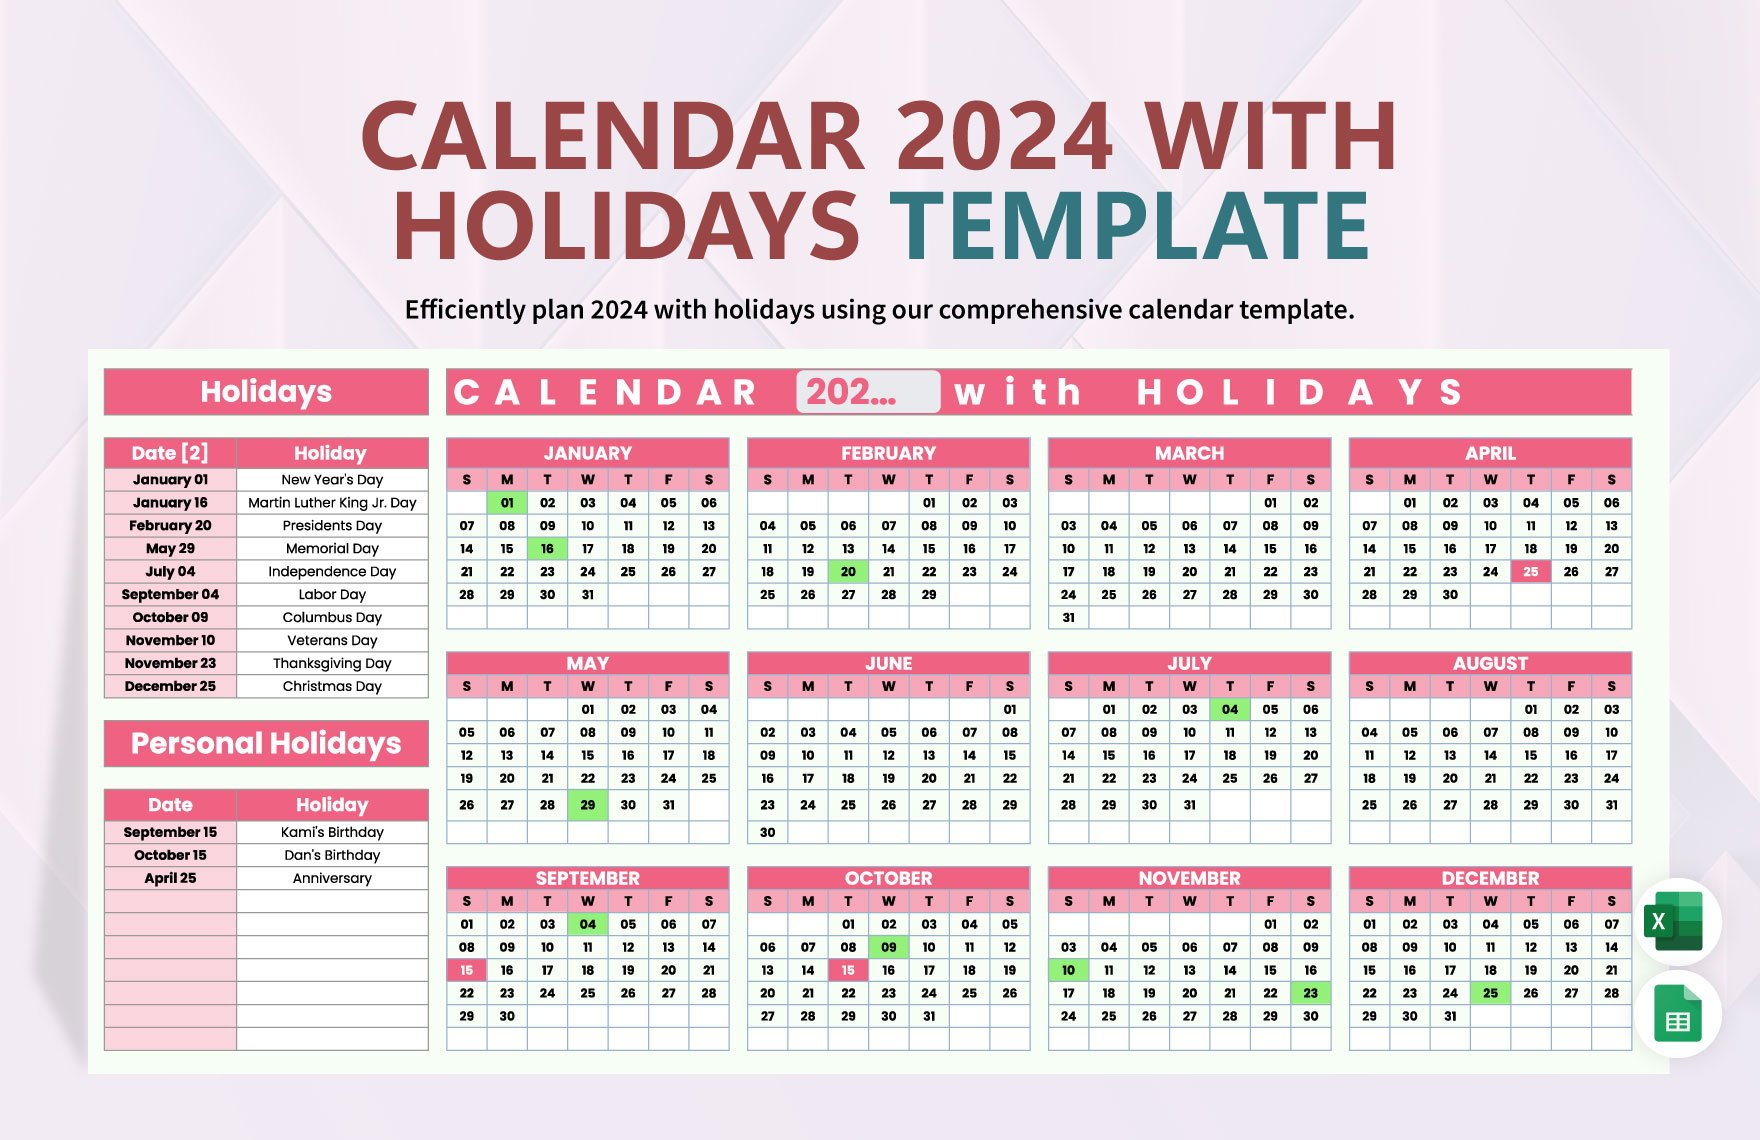 Free Calendar 2024 with Holidays Template in Excel, Google Sheets